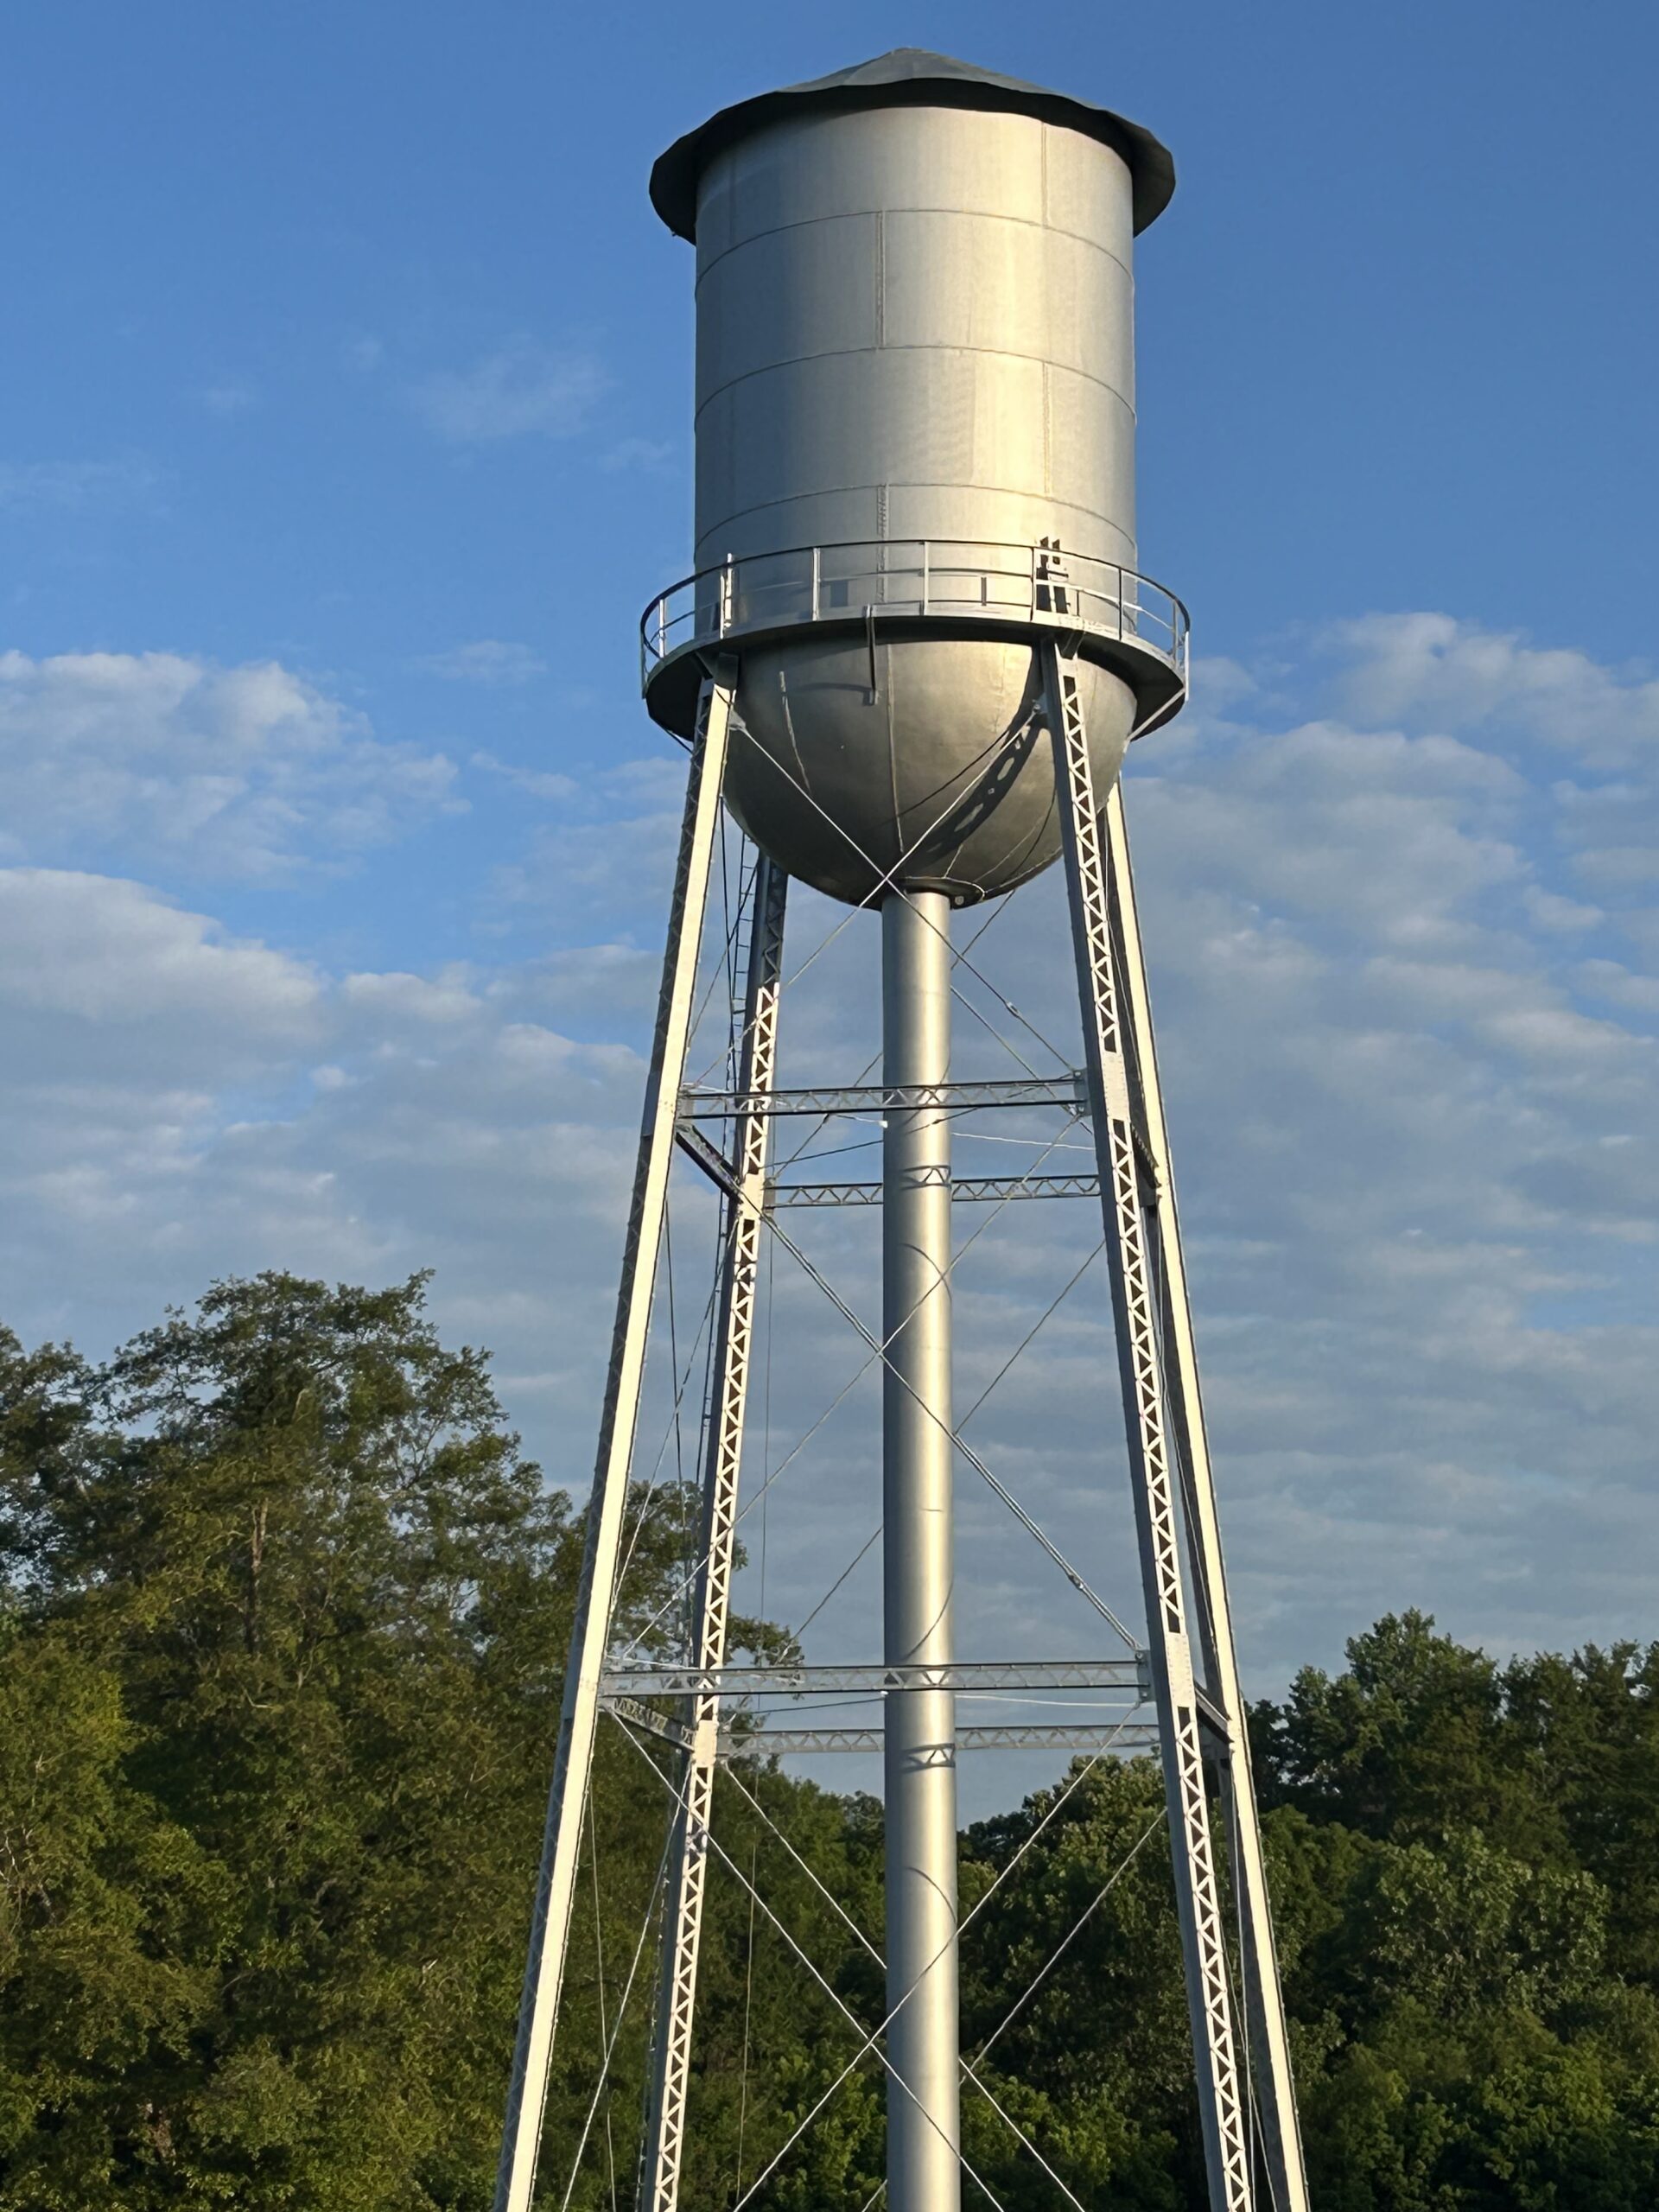 Ode to a Water Tower